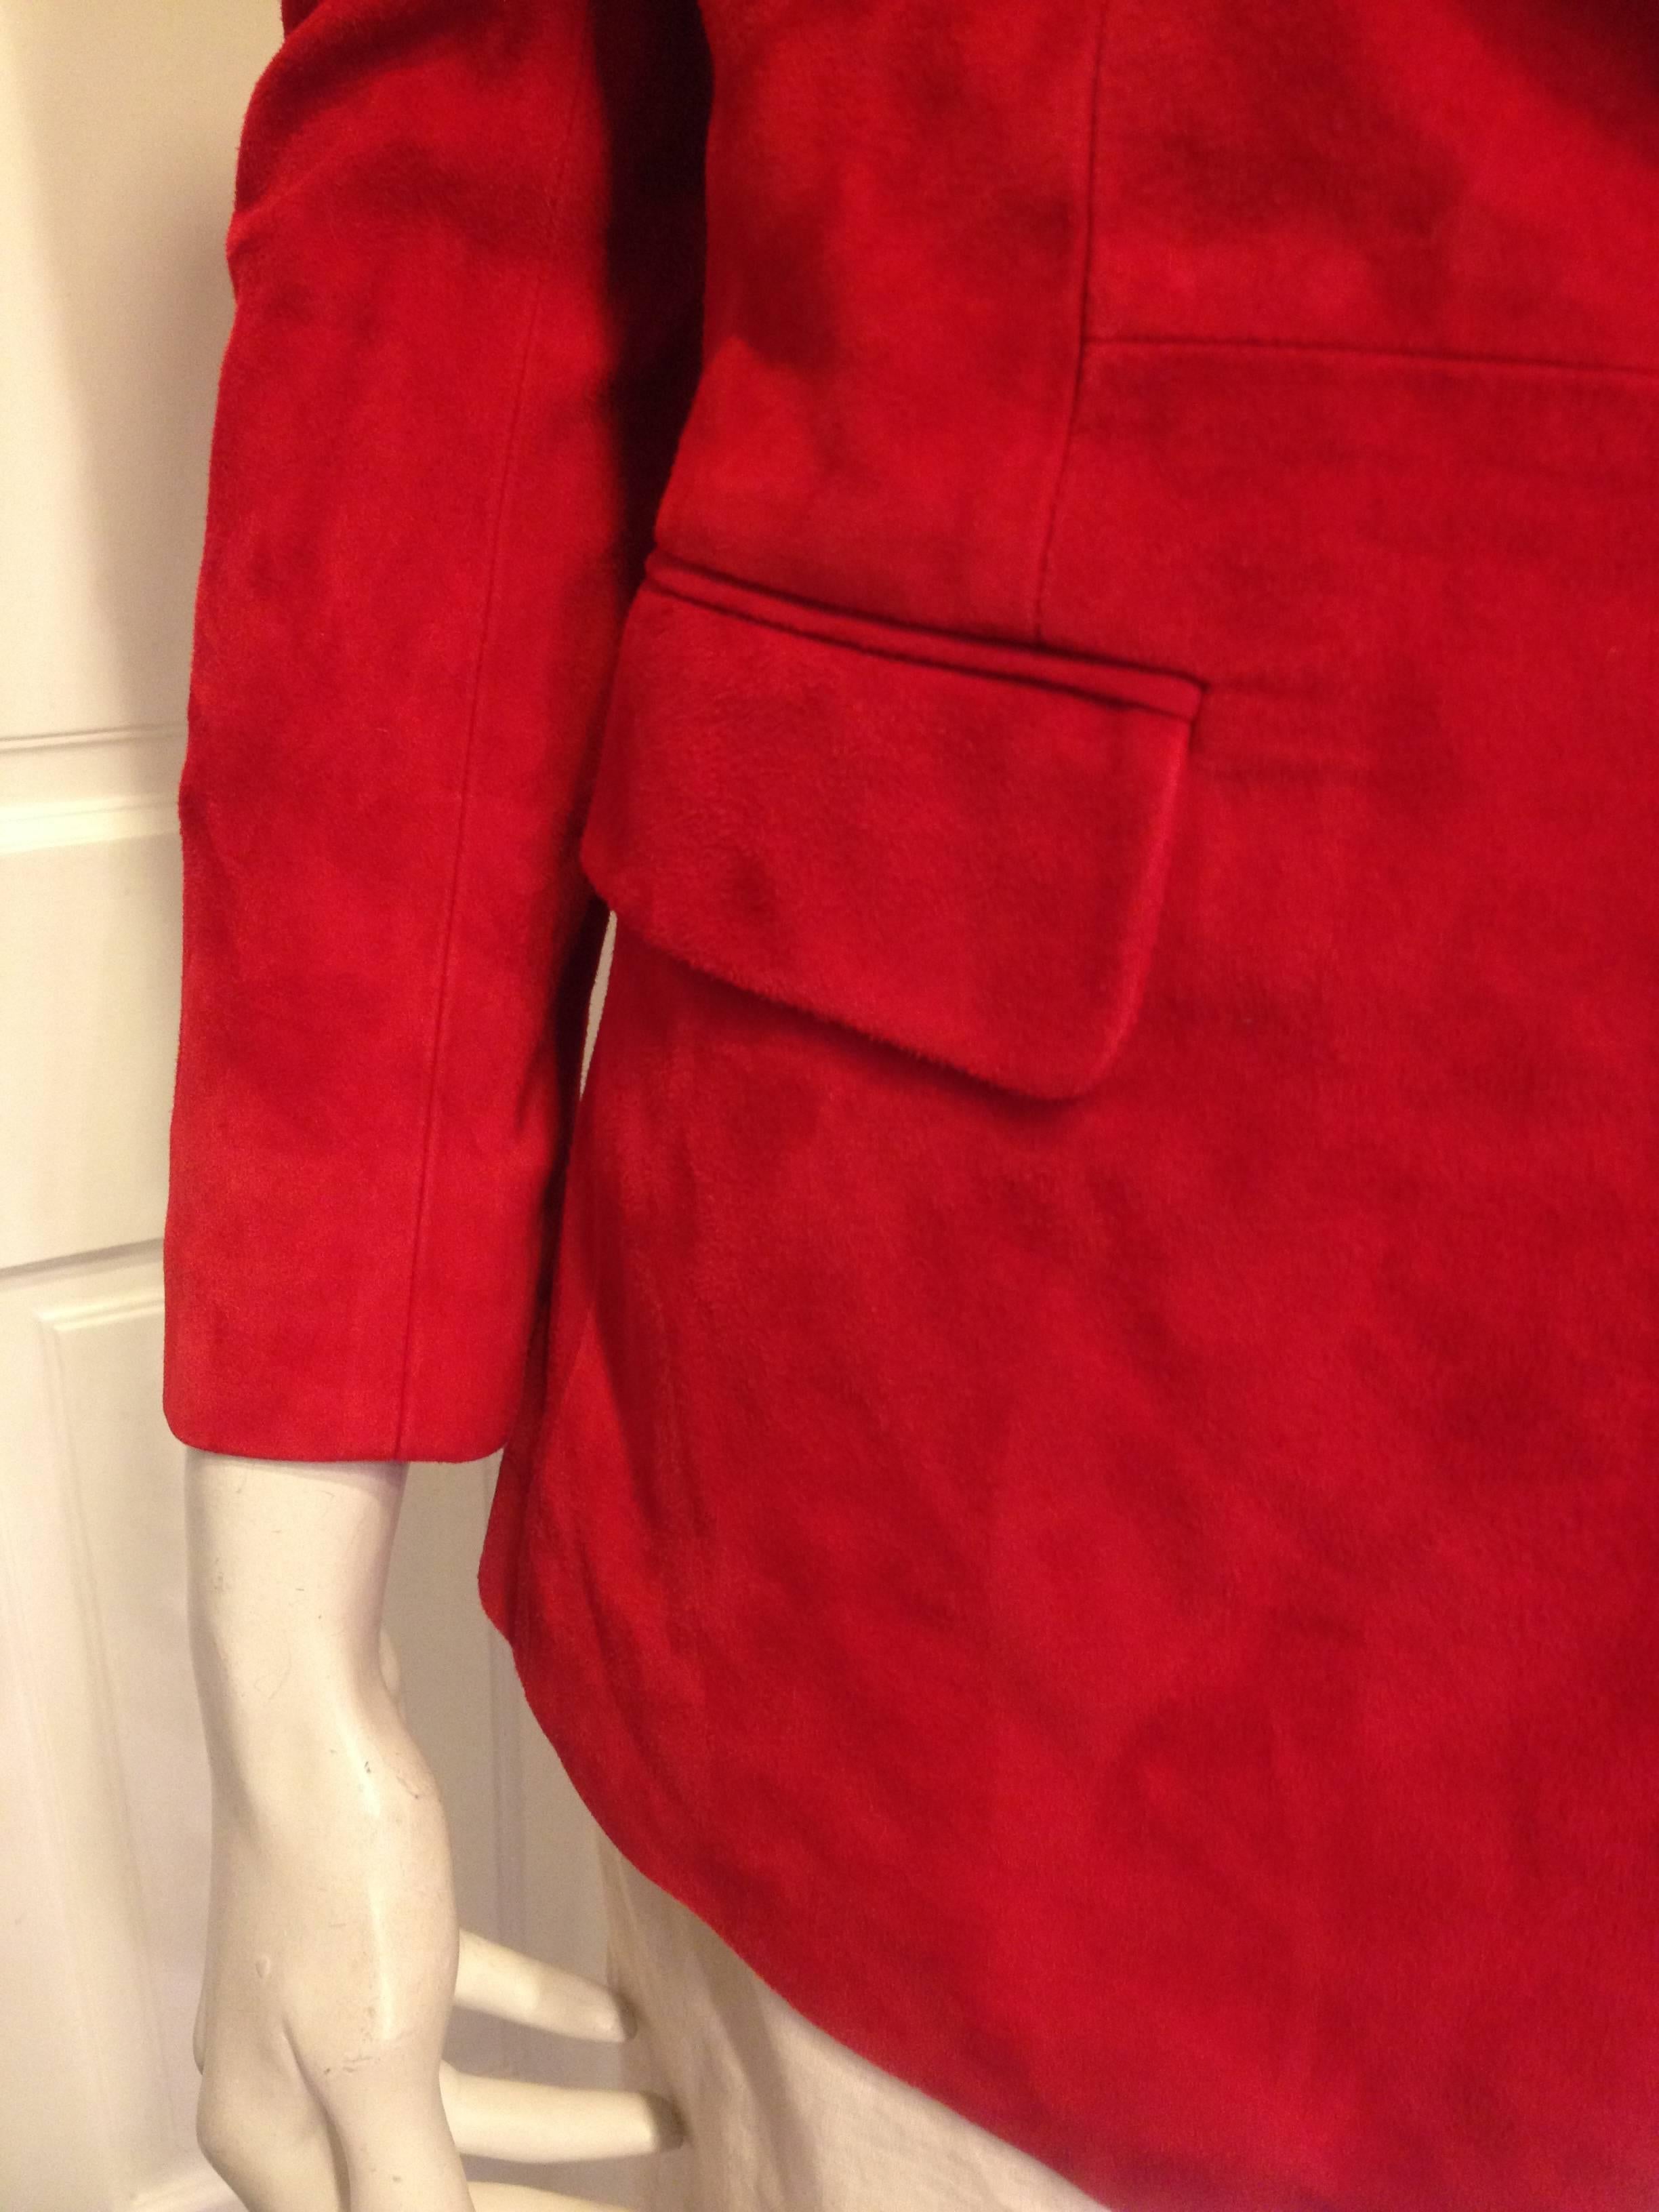 Balmain Red Suede Blazer In Excellent Condition For Sale In San Francisco, CA